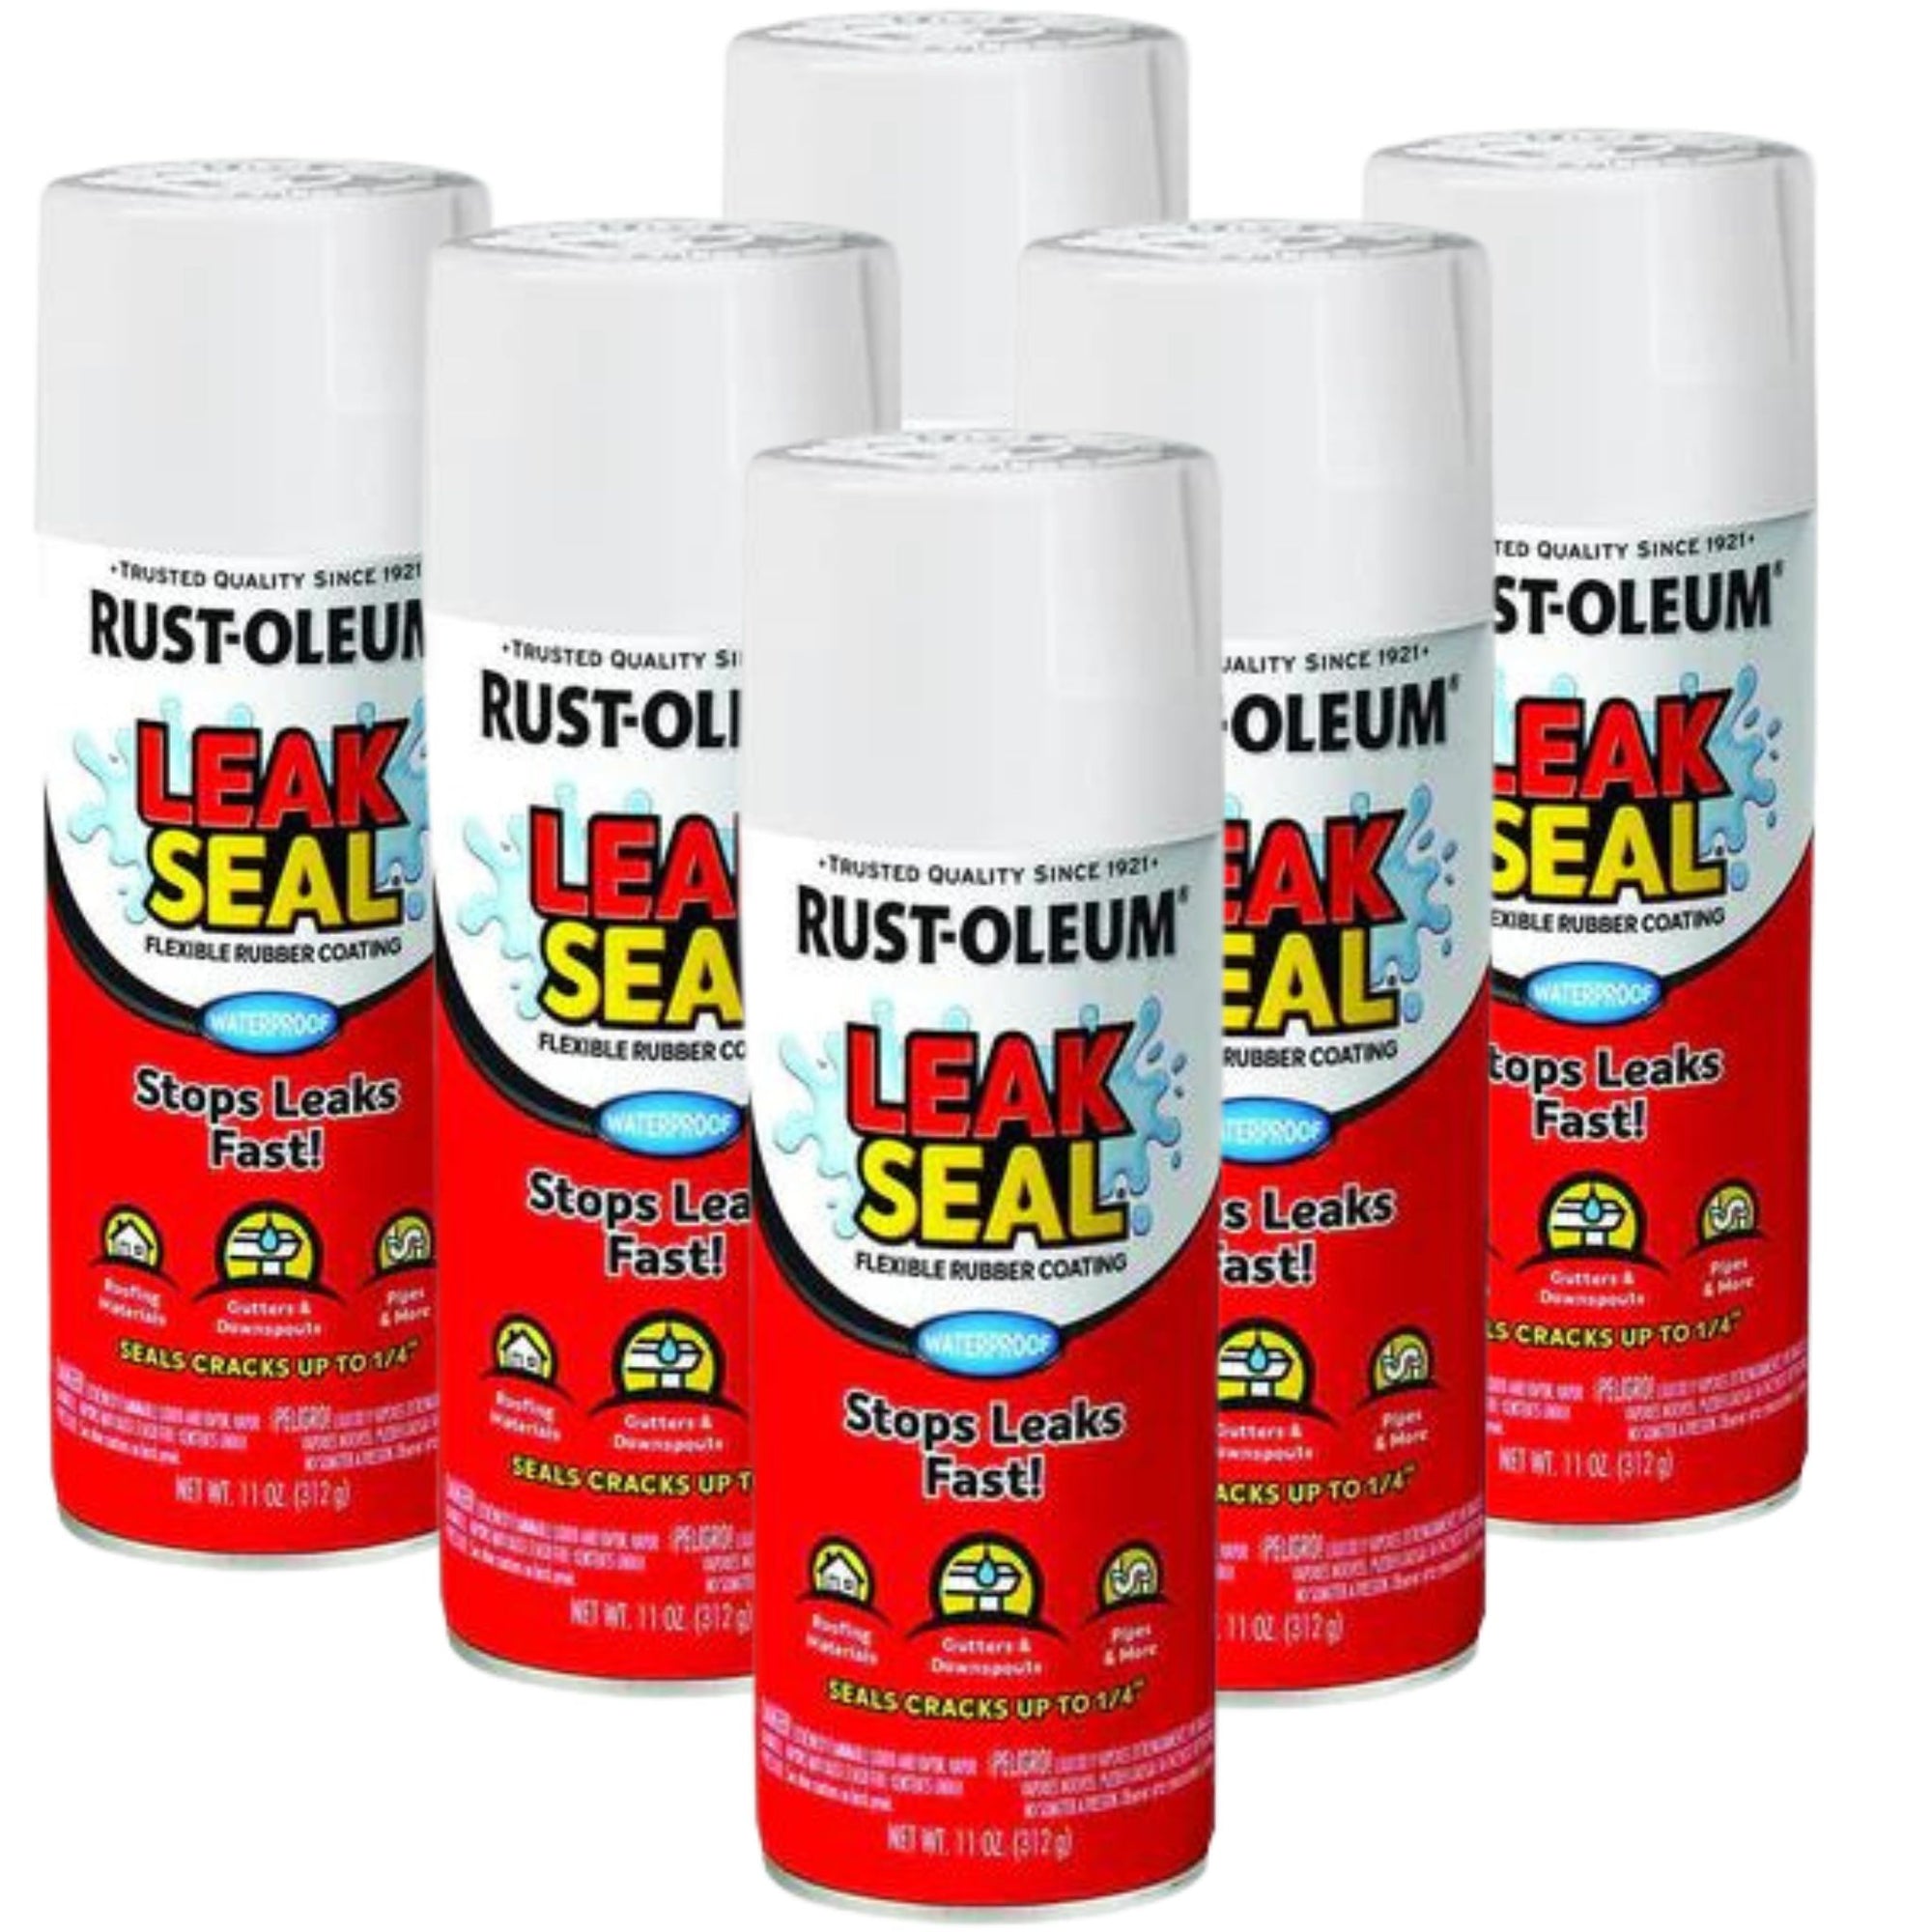 6 Cans | Rust-Oleum 340g Leakseal Rubberised Coating Spray | WHITE 367858 - South East Clearance Centre